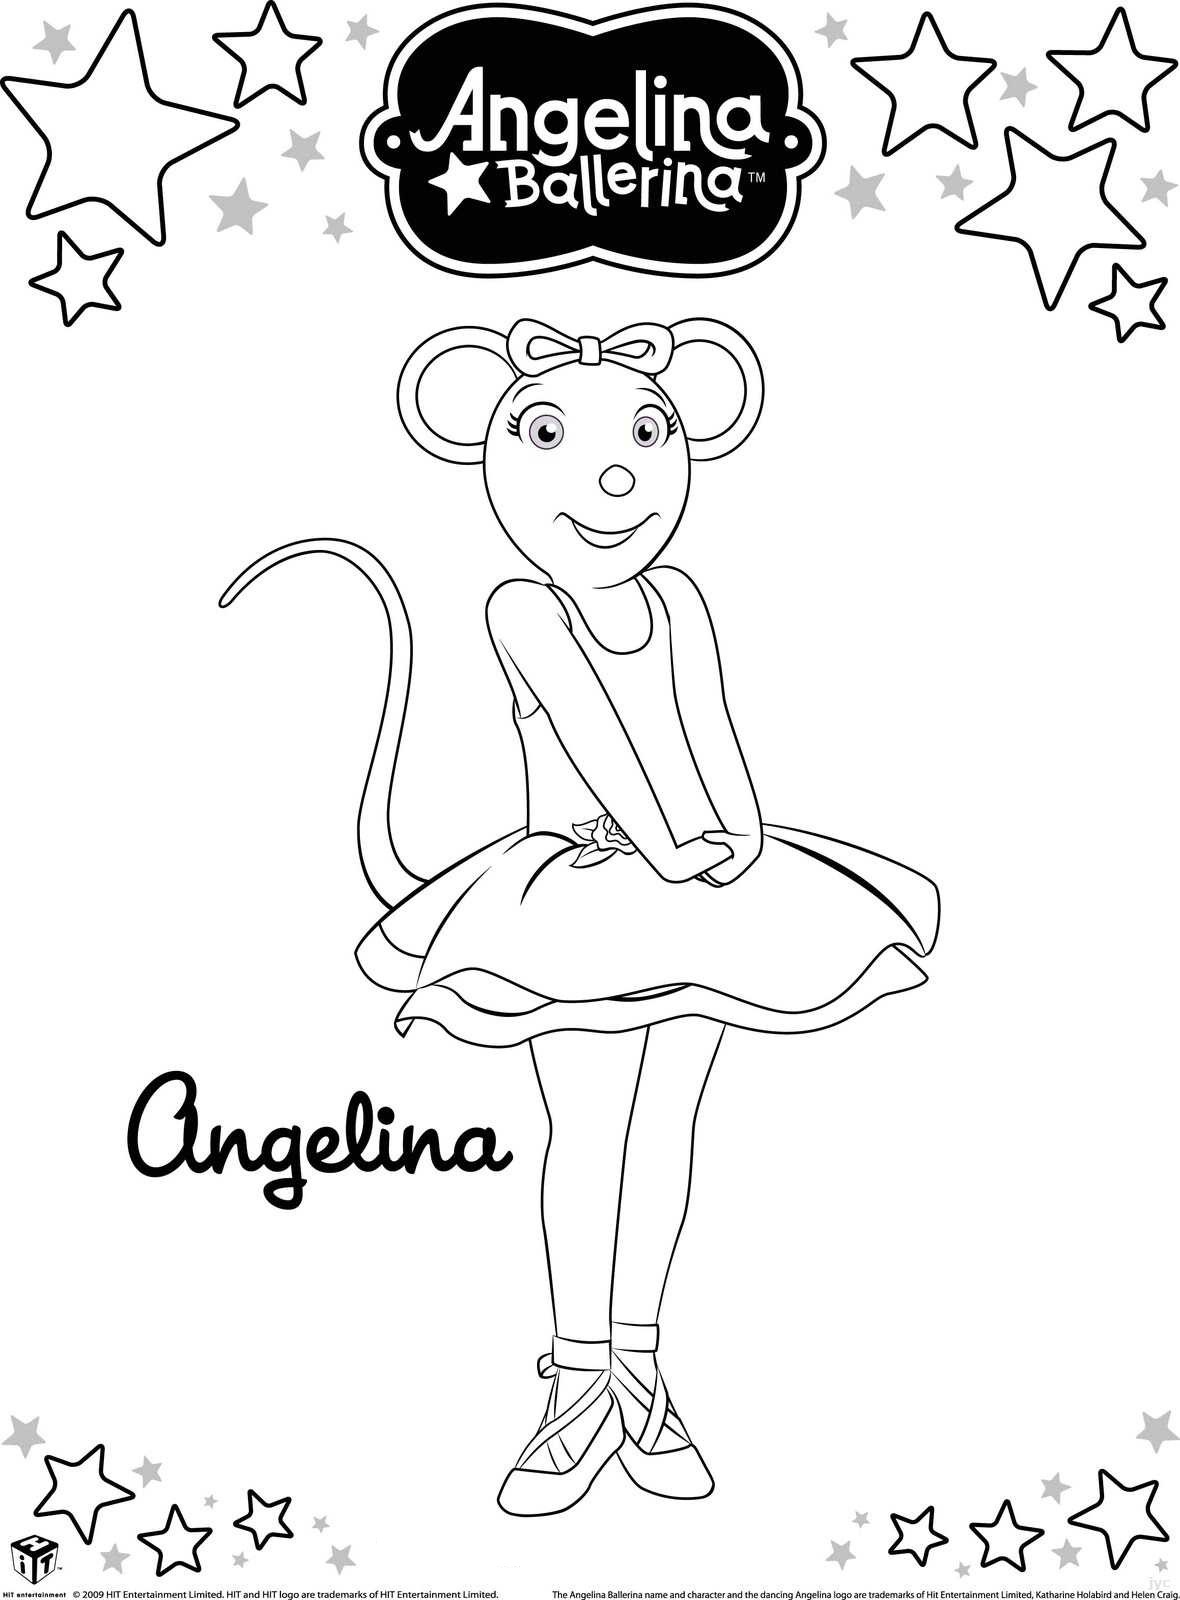 Printable Angelina Ballerina Coloring Pages Pdf - Coloring Pages ngelina Ballerina